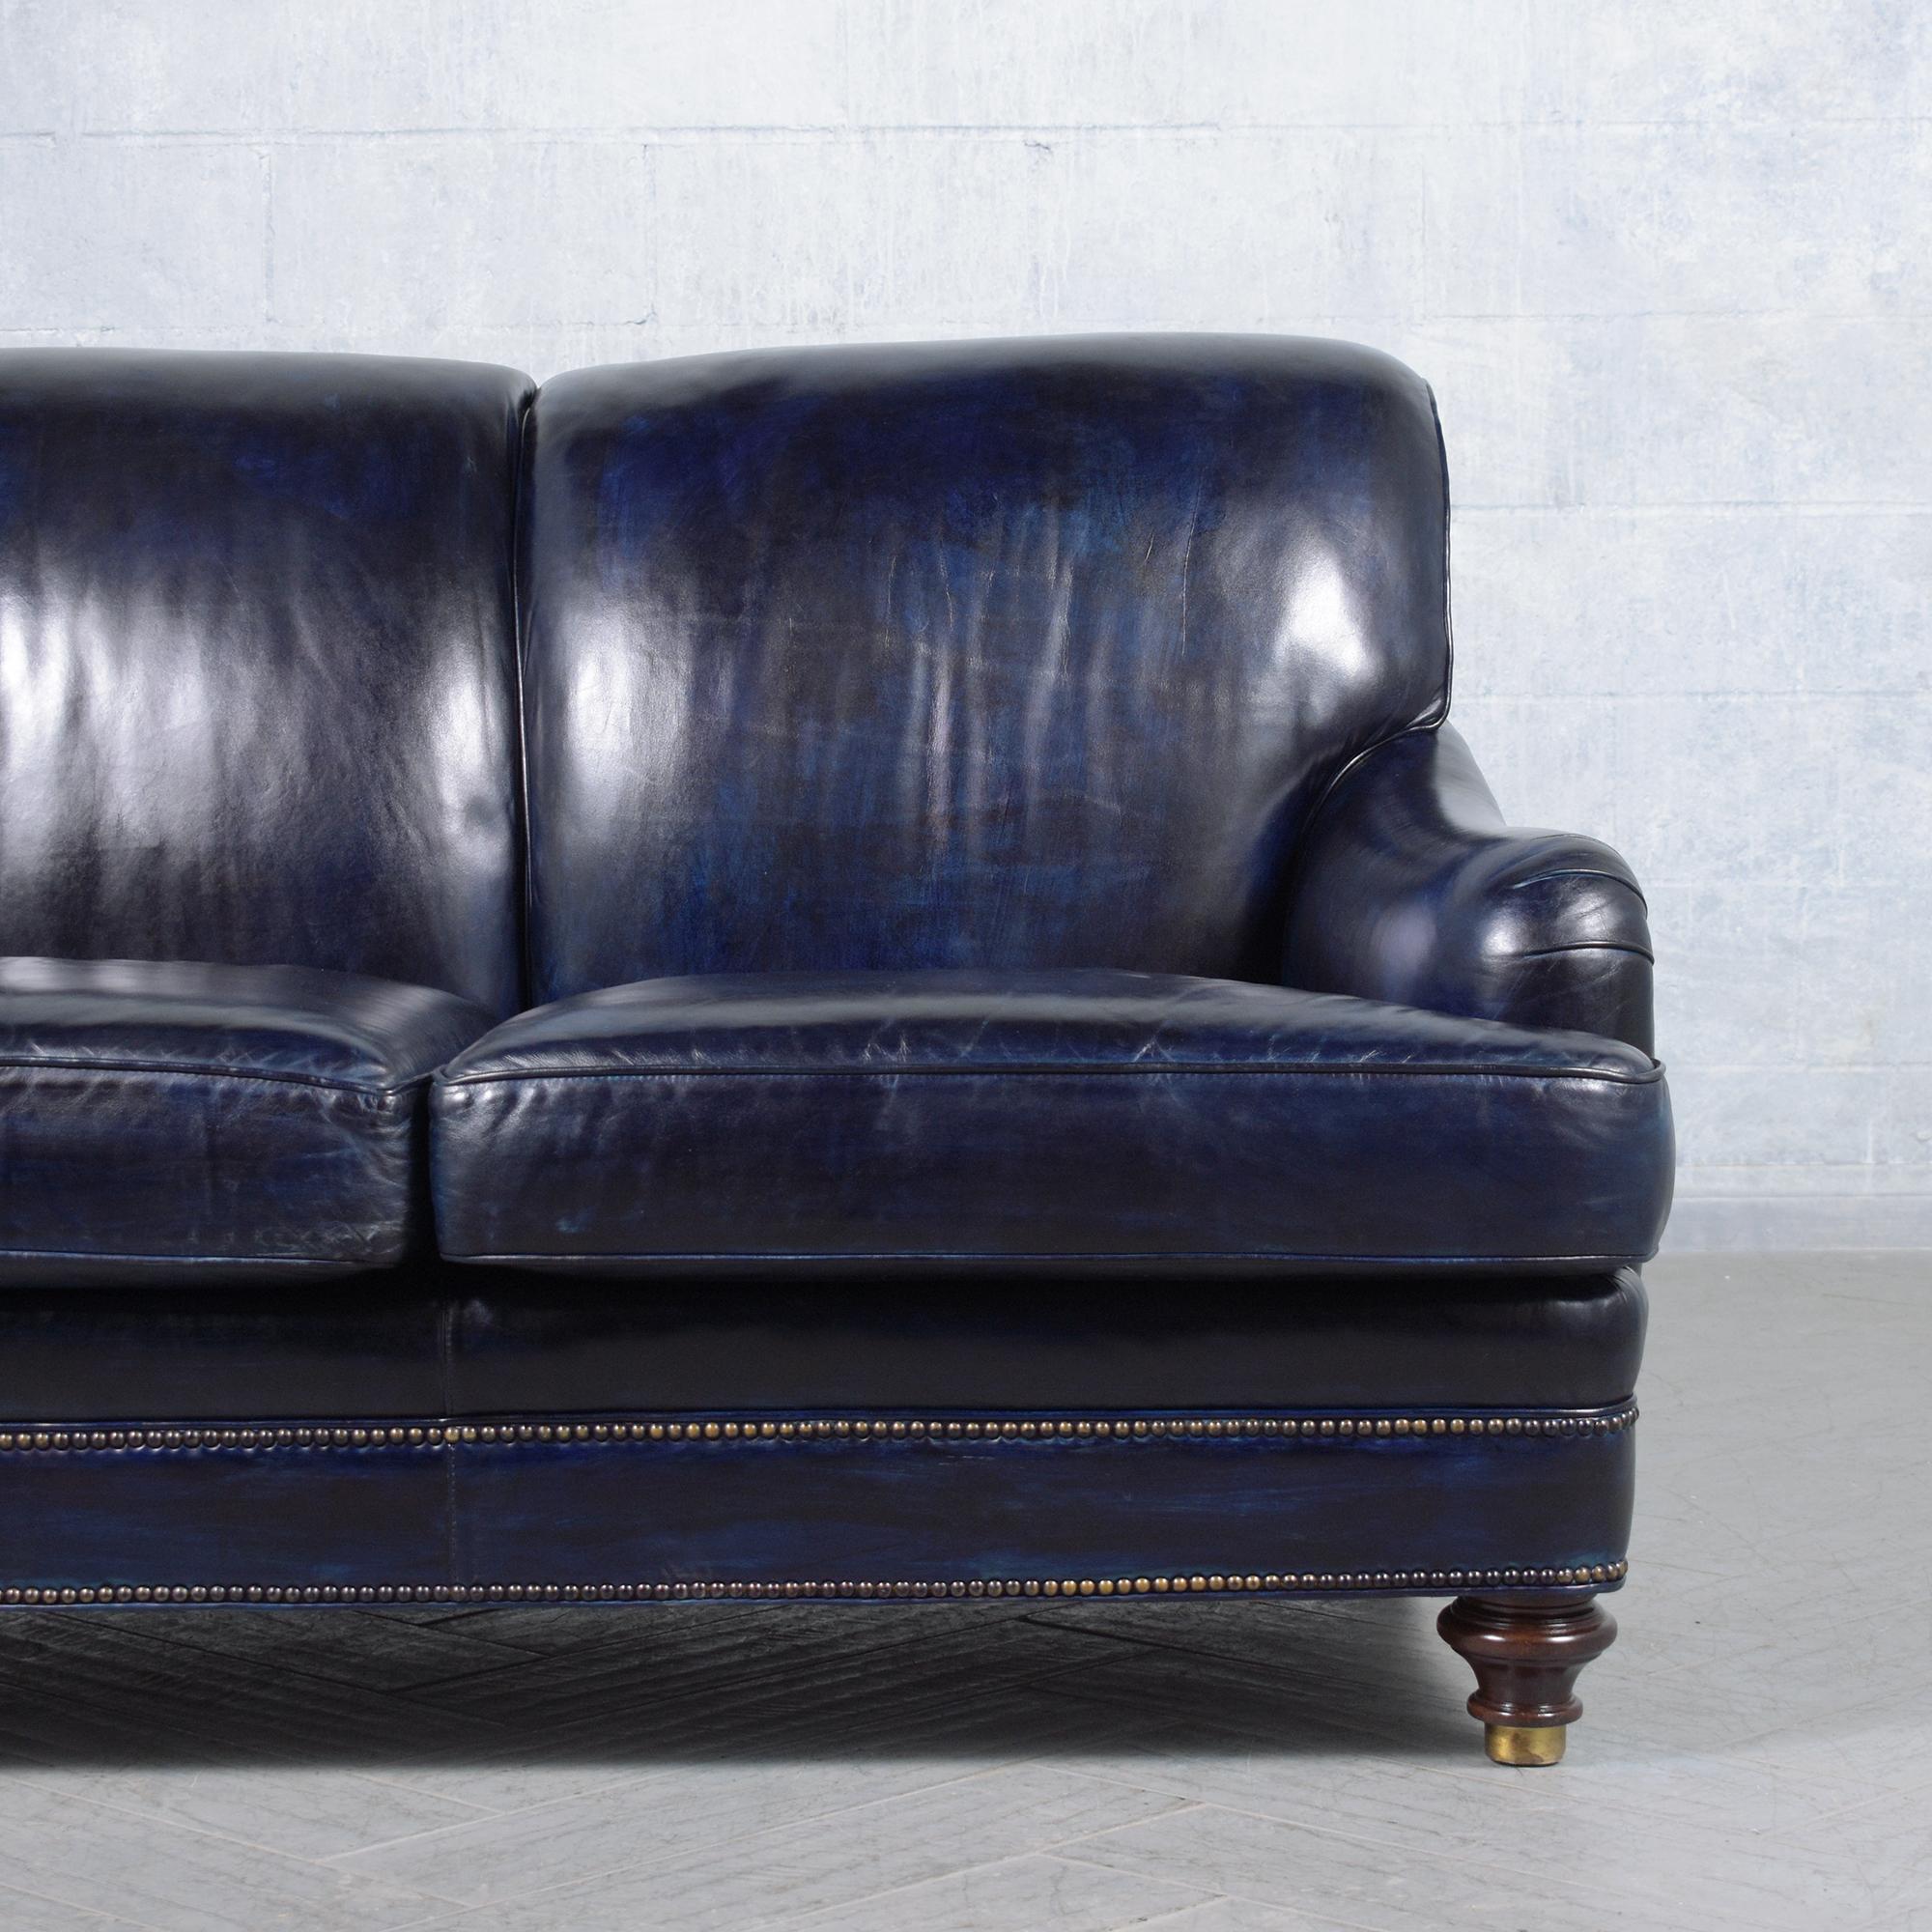 Hand-Crafted Hancock & Moore Loveseat: Classic English Elegance in Navy Blue Leather